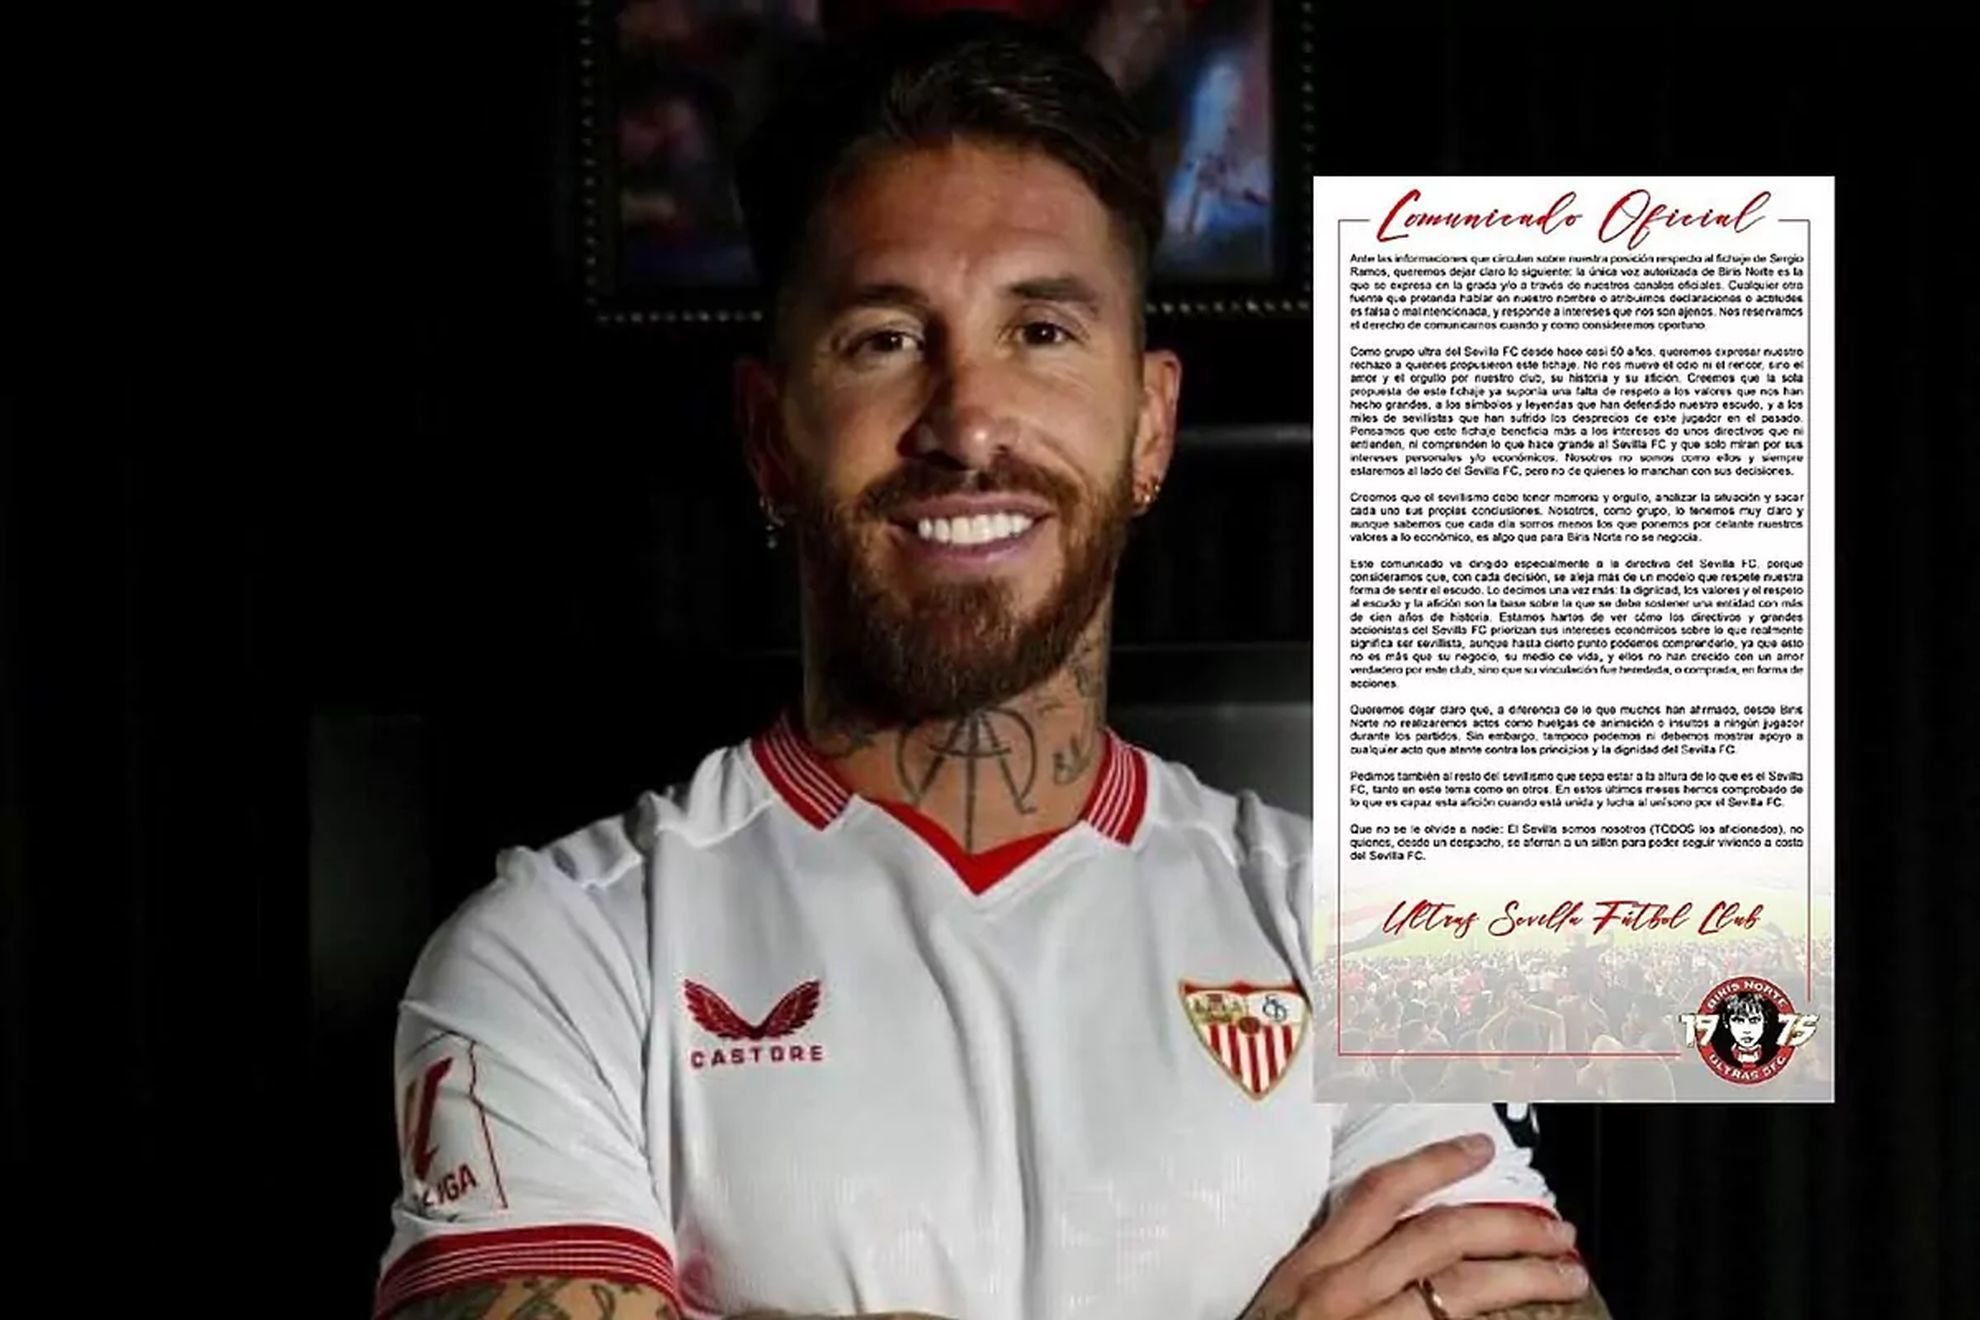 Sevilla ultras blast Sergio Ramos: A lack of respect for the values that made us great